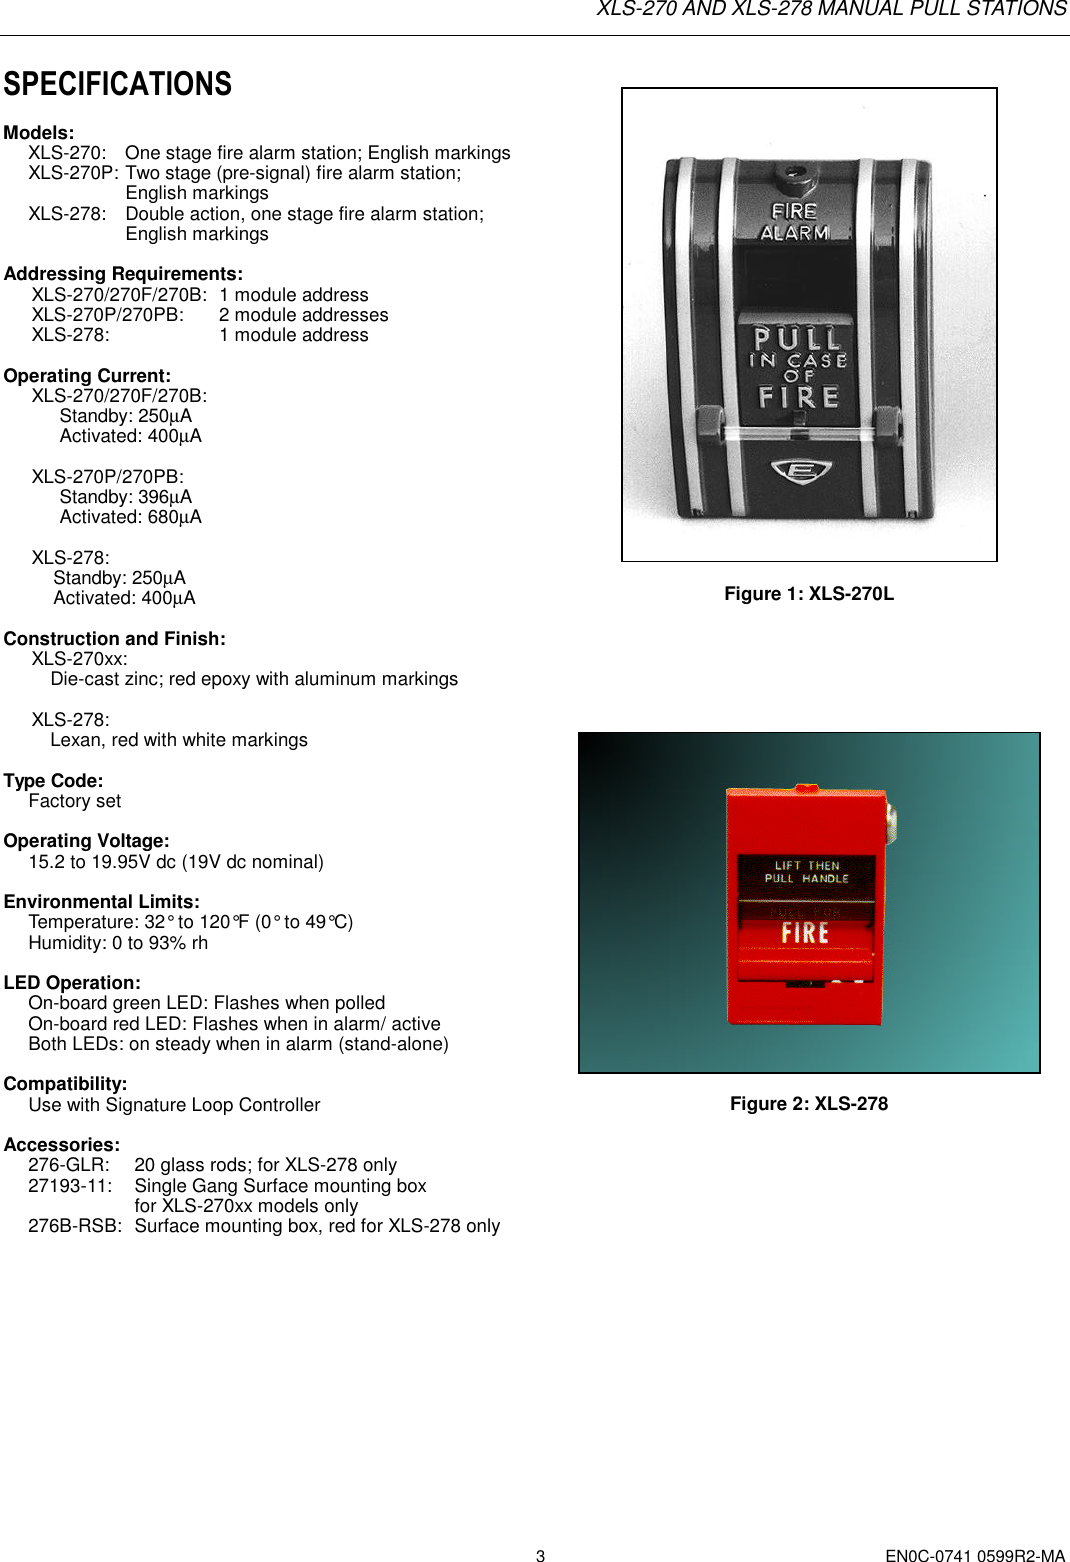 Page 3 of 4 - Honeywell Honeywell-Honeywell-Water-Heater-Xls-278-Users-Manual- 0741- XLS-278 And XLS-270 Manual Pull Stations  Honeywell-honeywell-water-heater-xls-278-users-manual